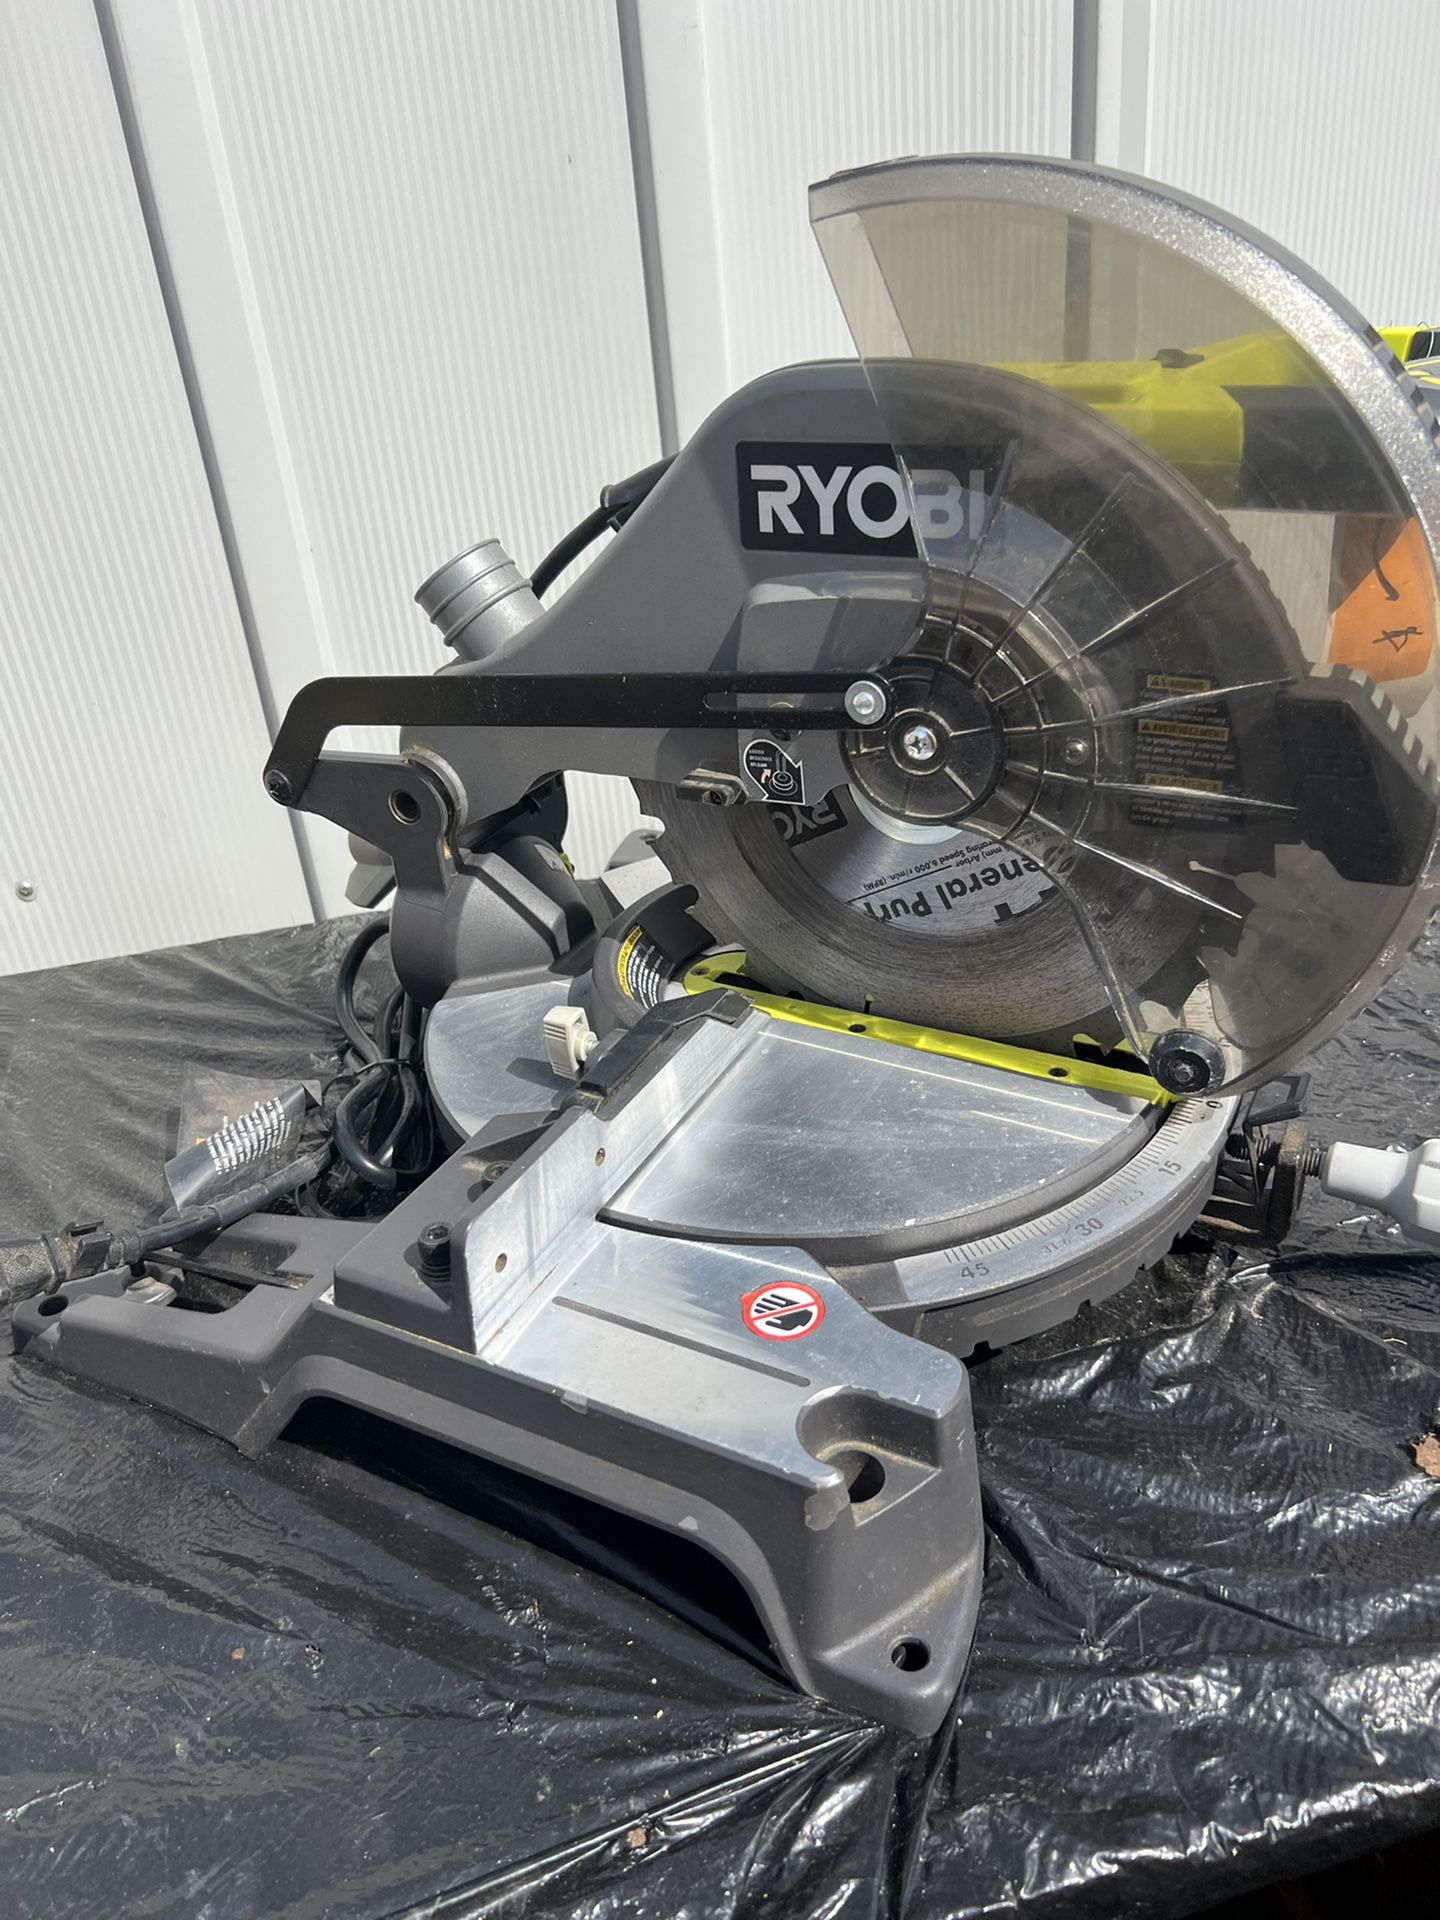 RYOBI 14 Amp Corded 10 in. Compound Miter Saw with LED Cutline Indicator  for Sale in La Habra Heights, CA OfferUp